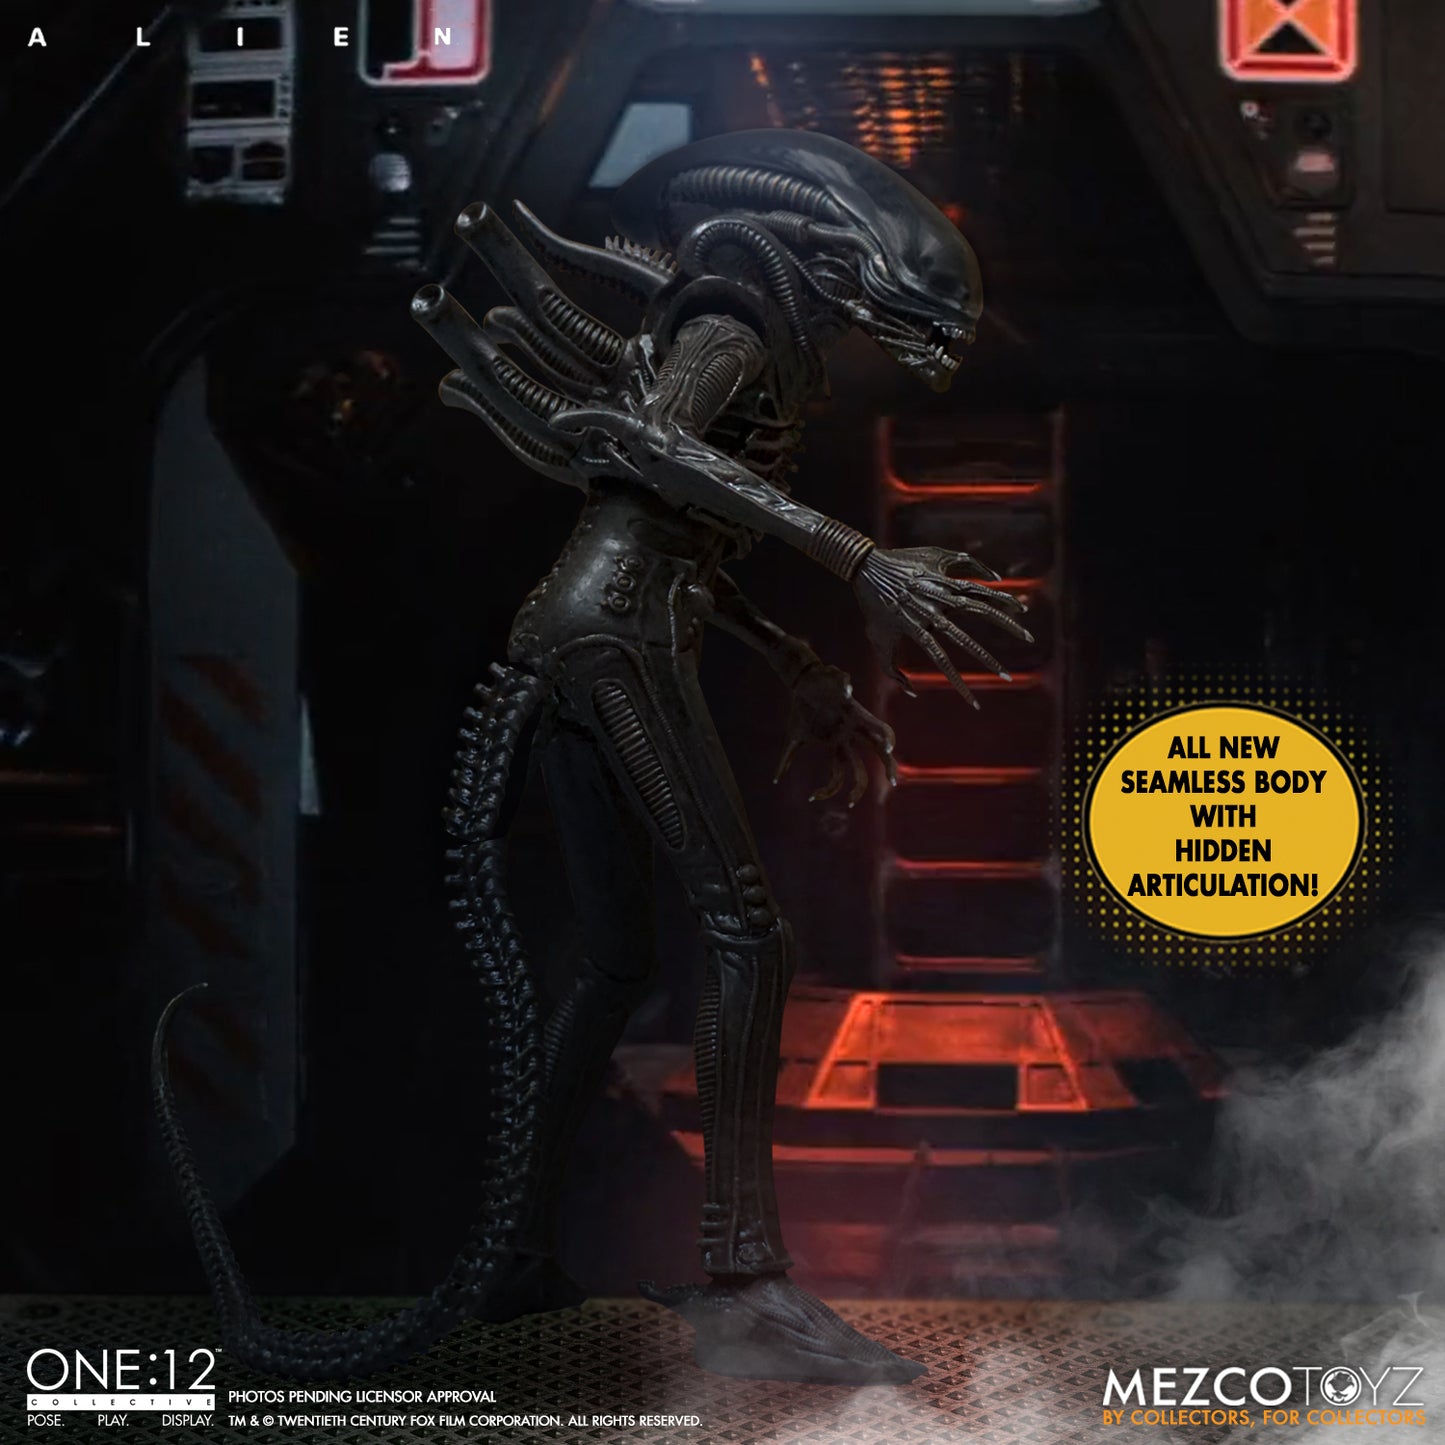 MEZCO -ONE-12 COLLECTIVE -  ALIEN DELUXE EDITION AF